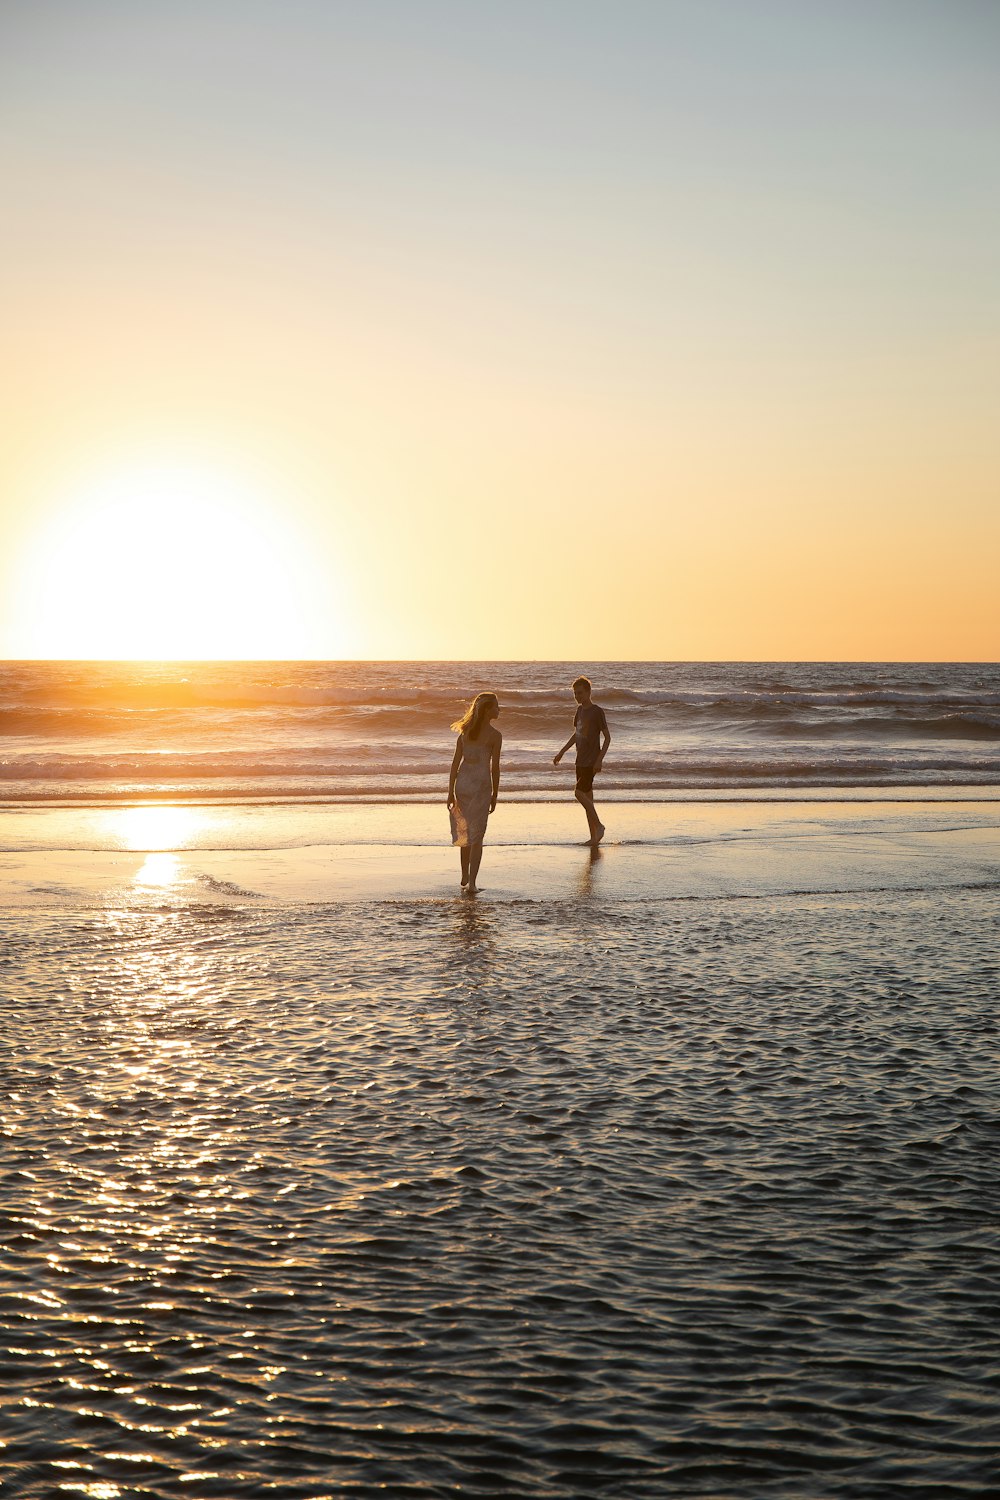 a man and woman walking on a beach at sunset